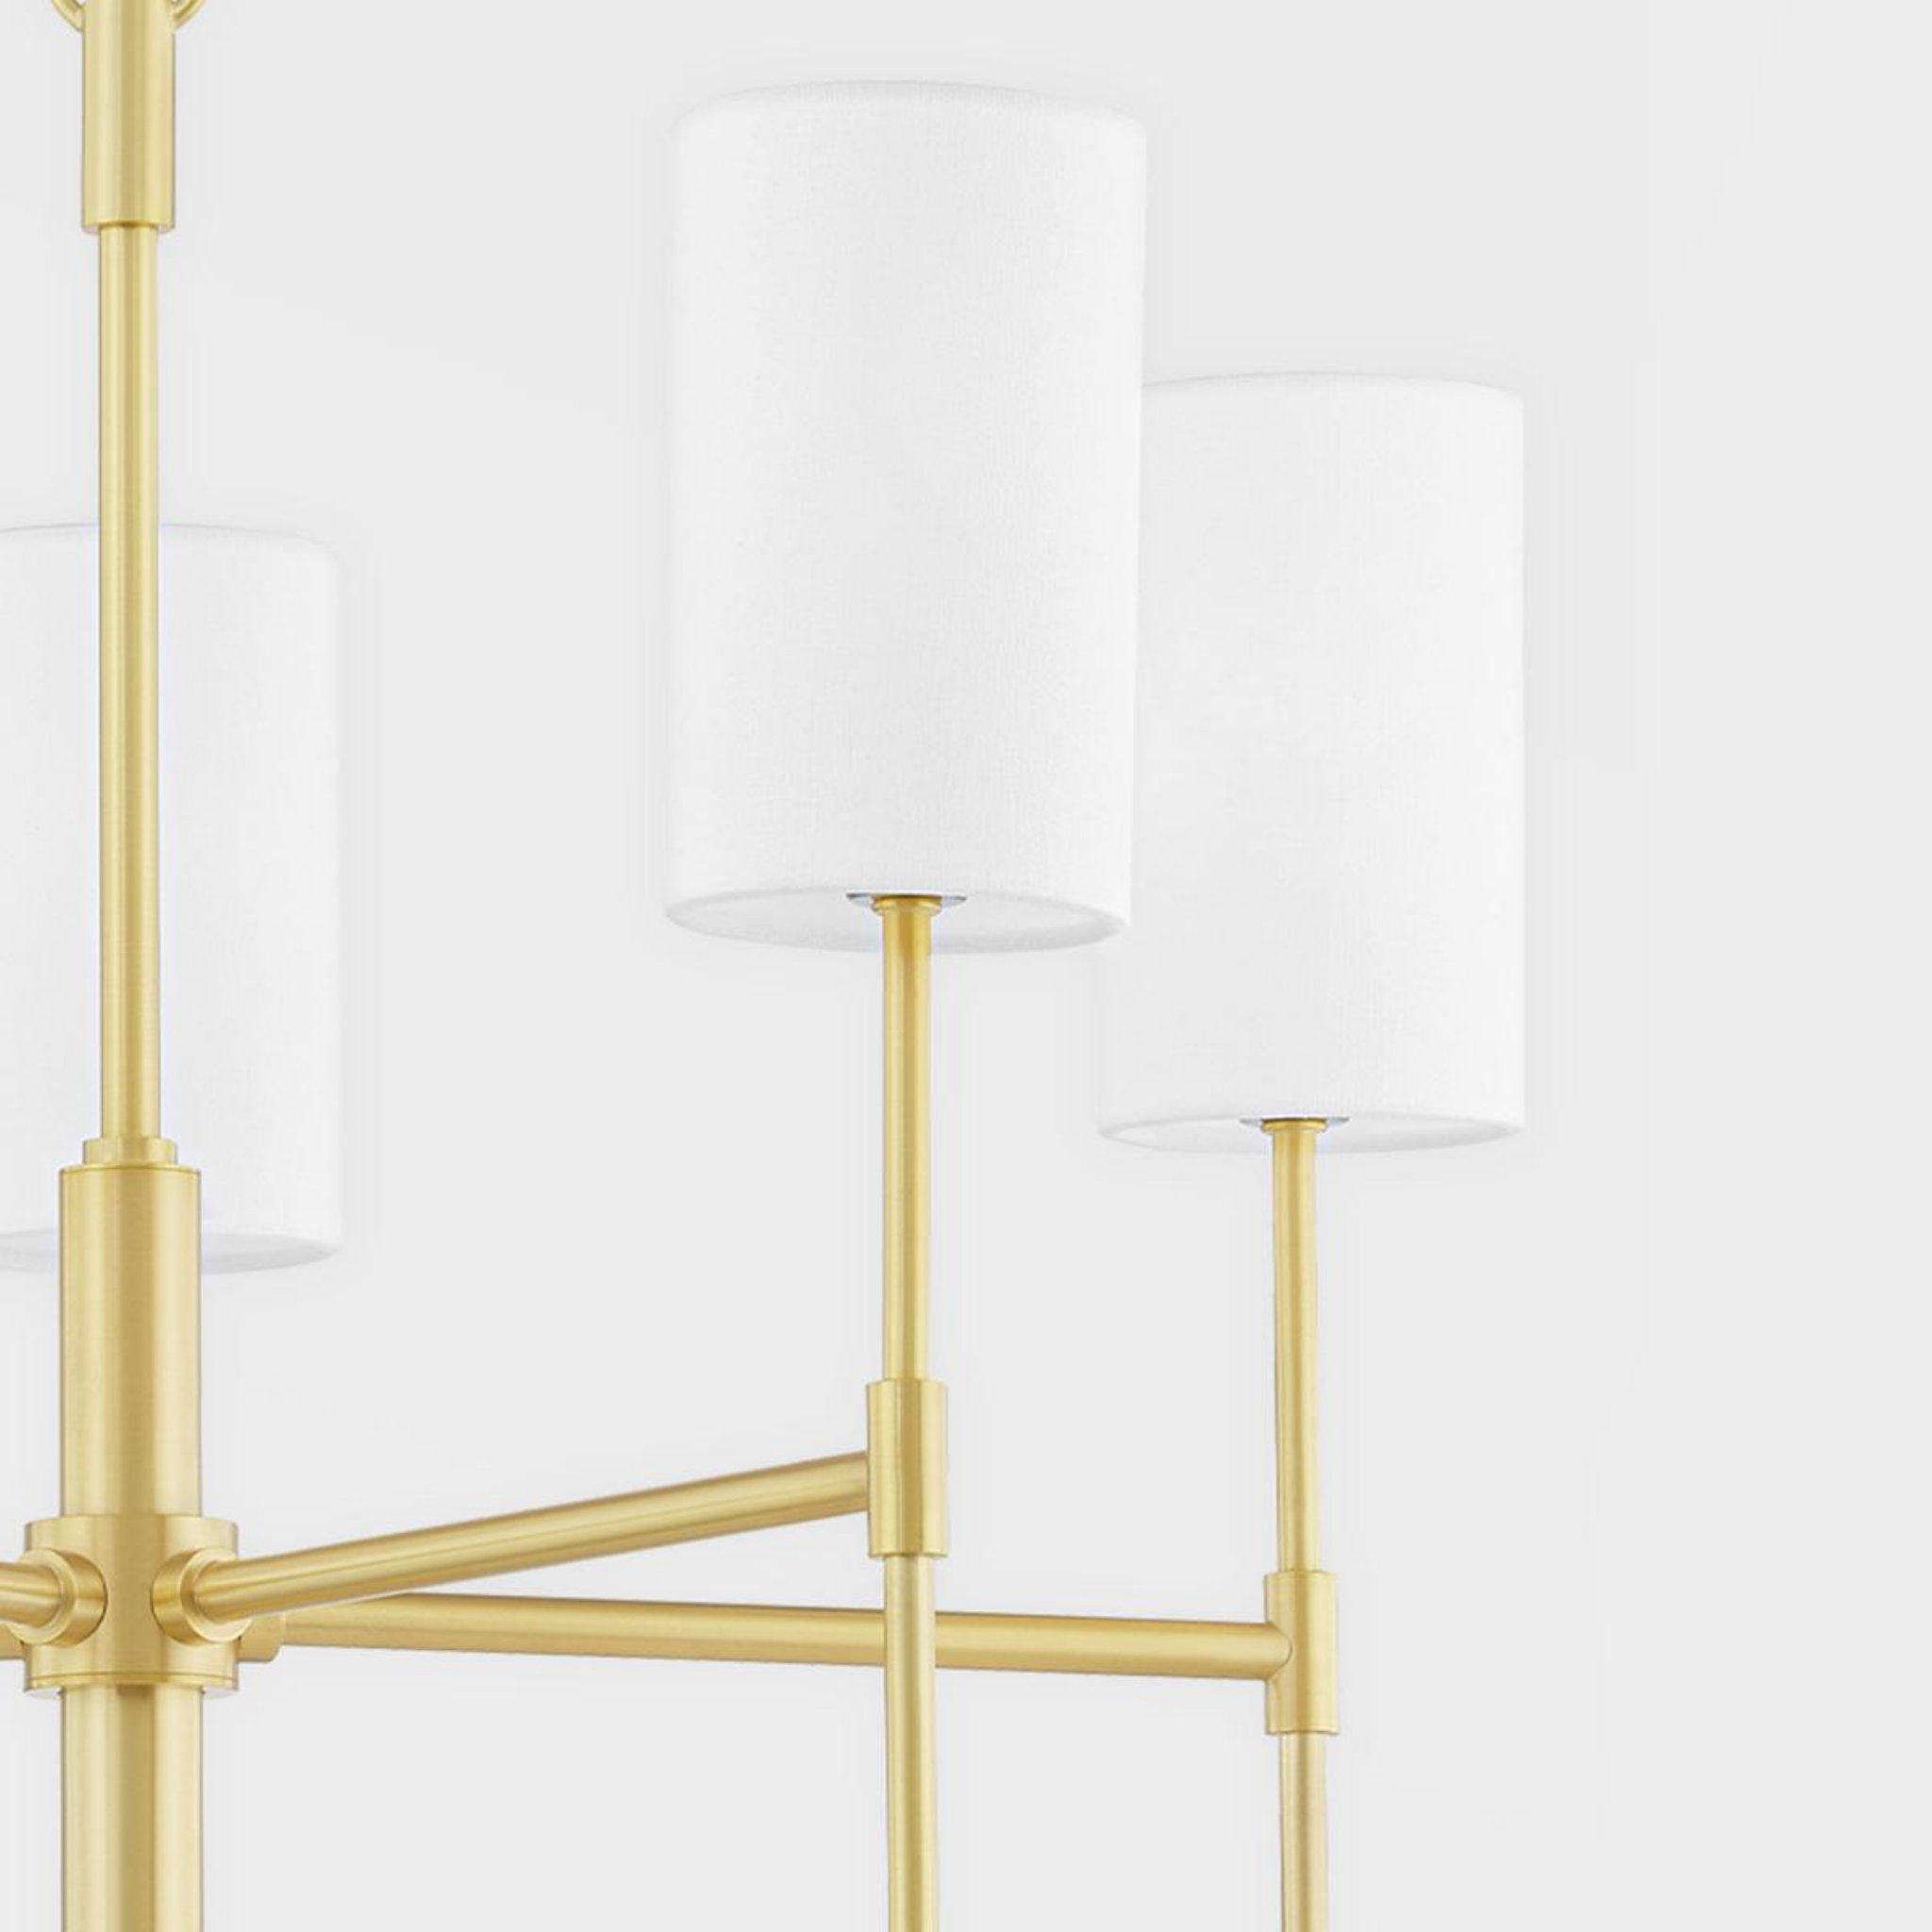 Olivia 1-Light Wall Sconce in Aged Brass